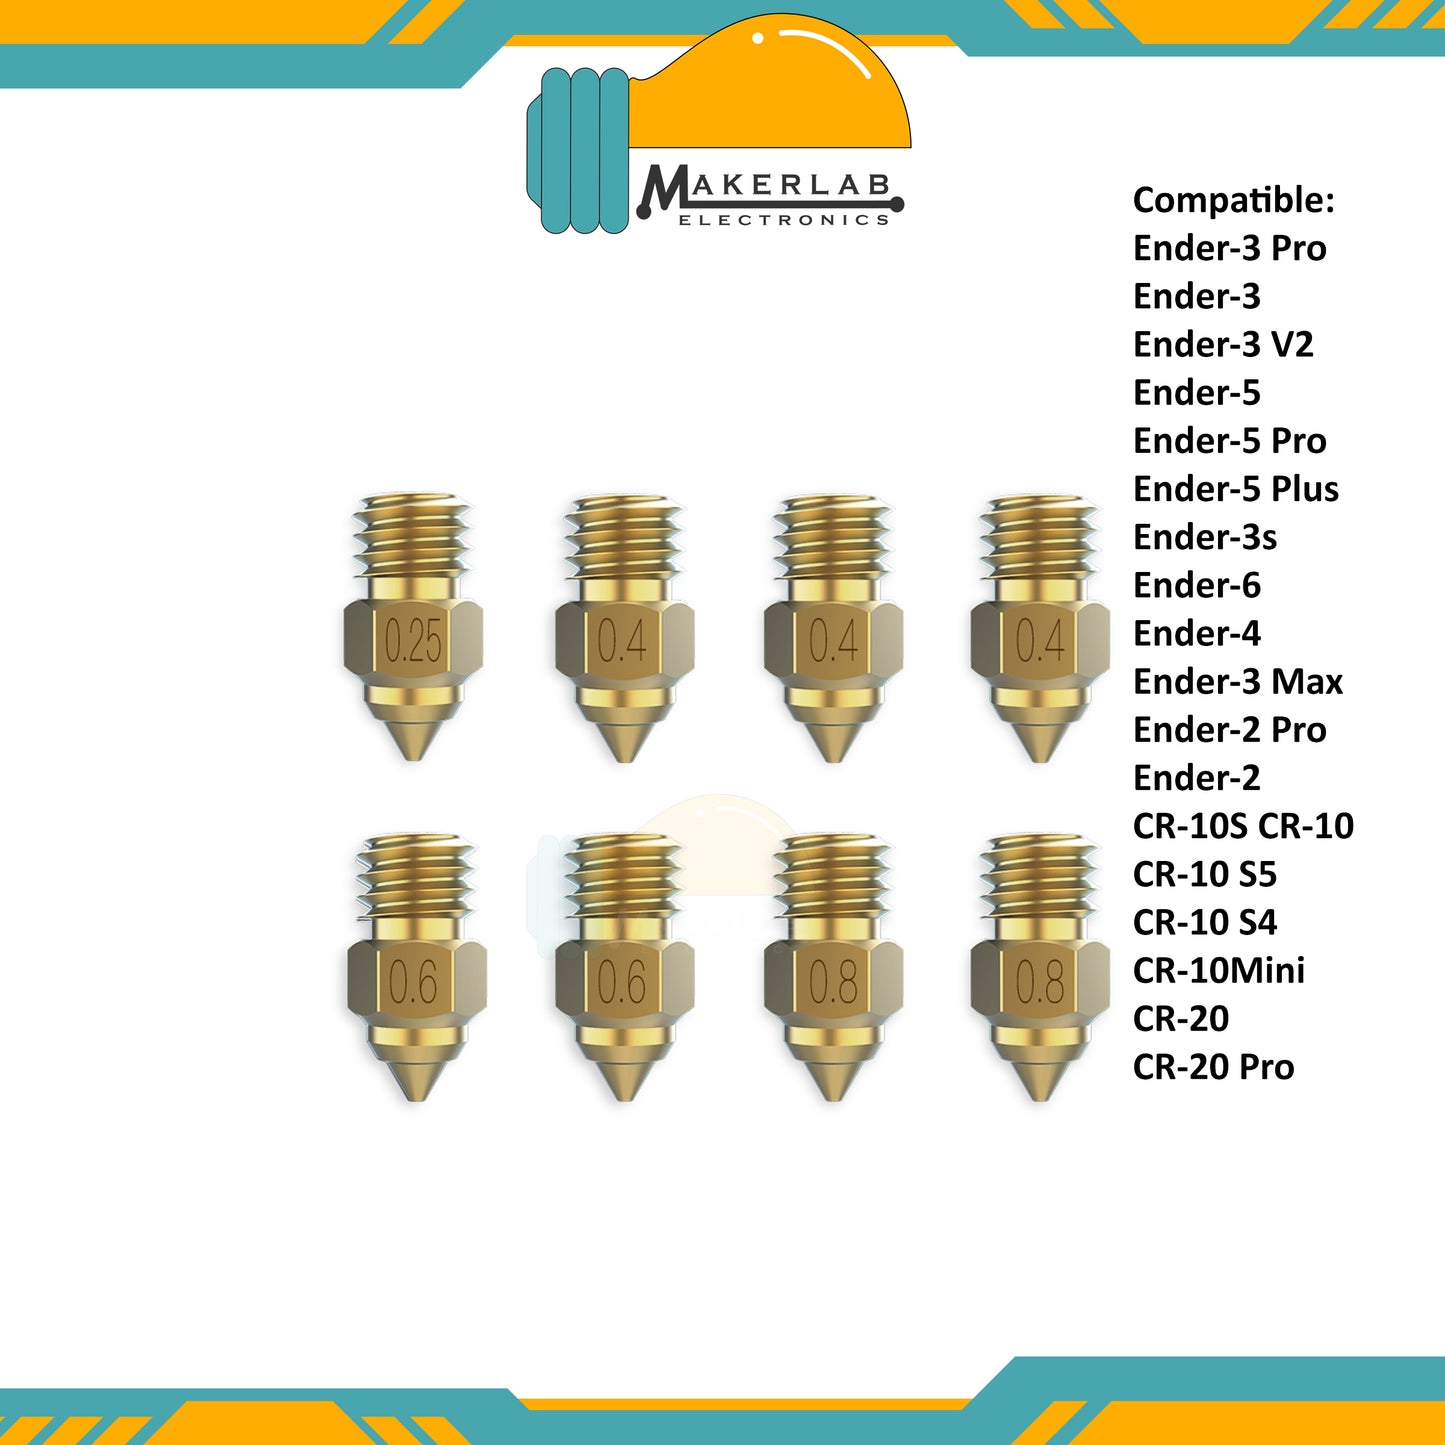 Creality High-end Brass Nozzle | Hardened Steel Nozzle | Copper Alloy Nozzle High Quality for 3D Printer